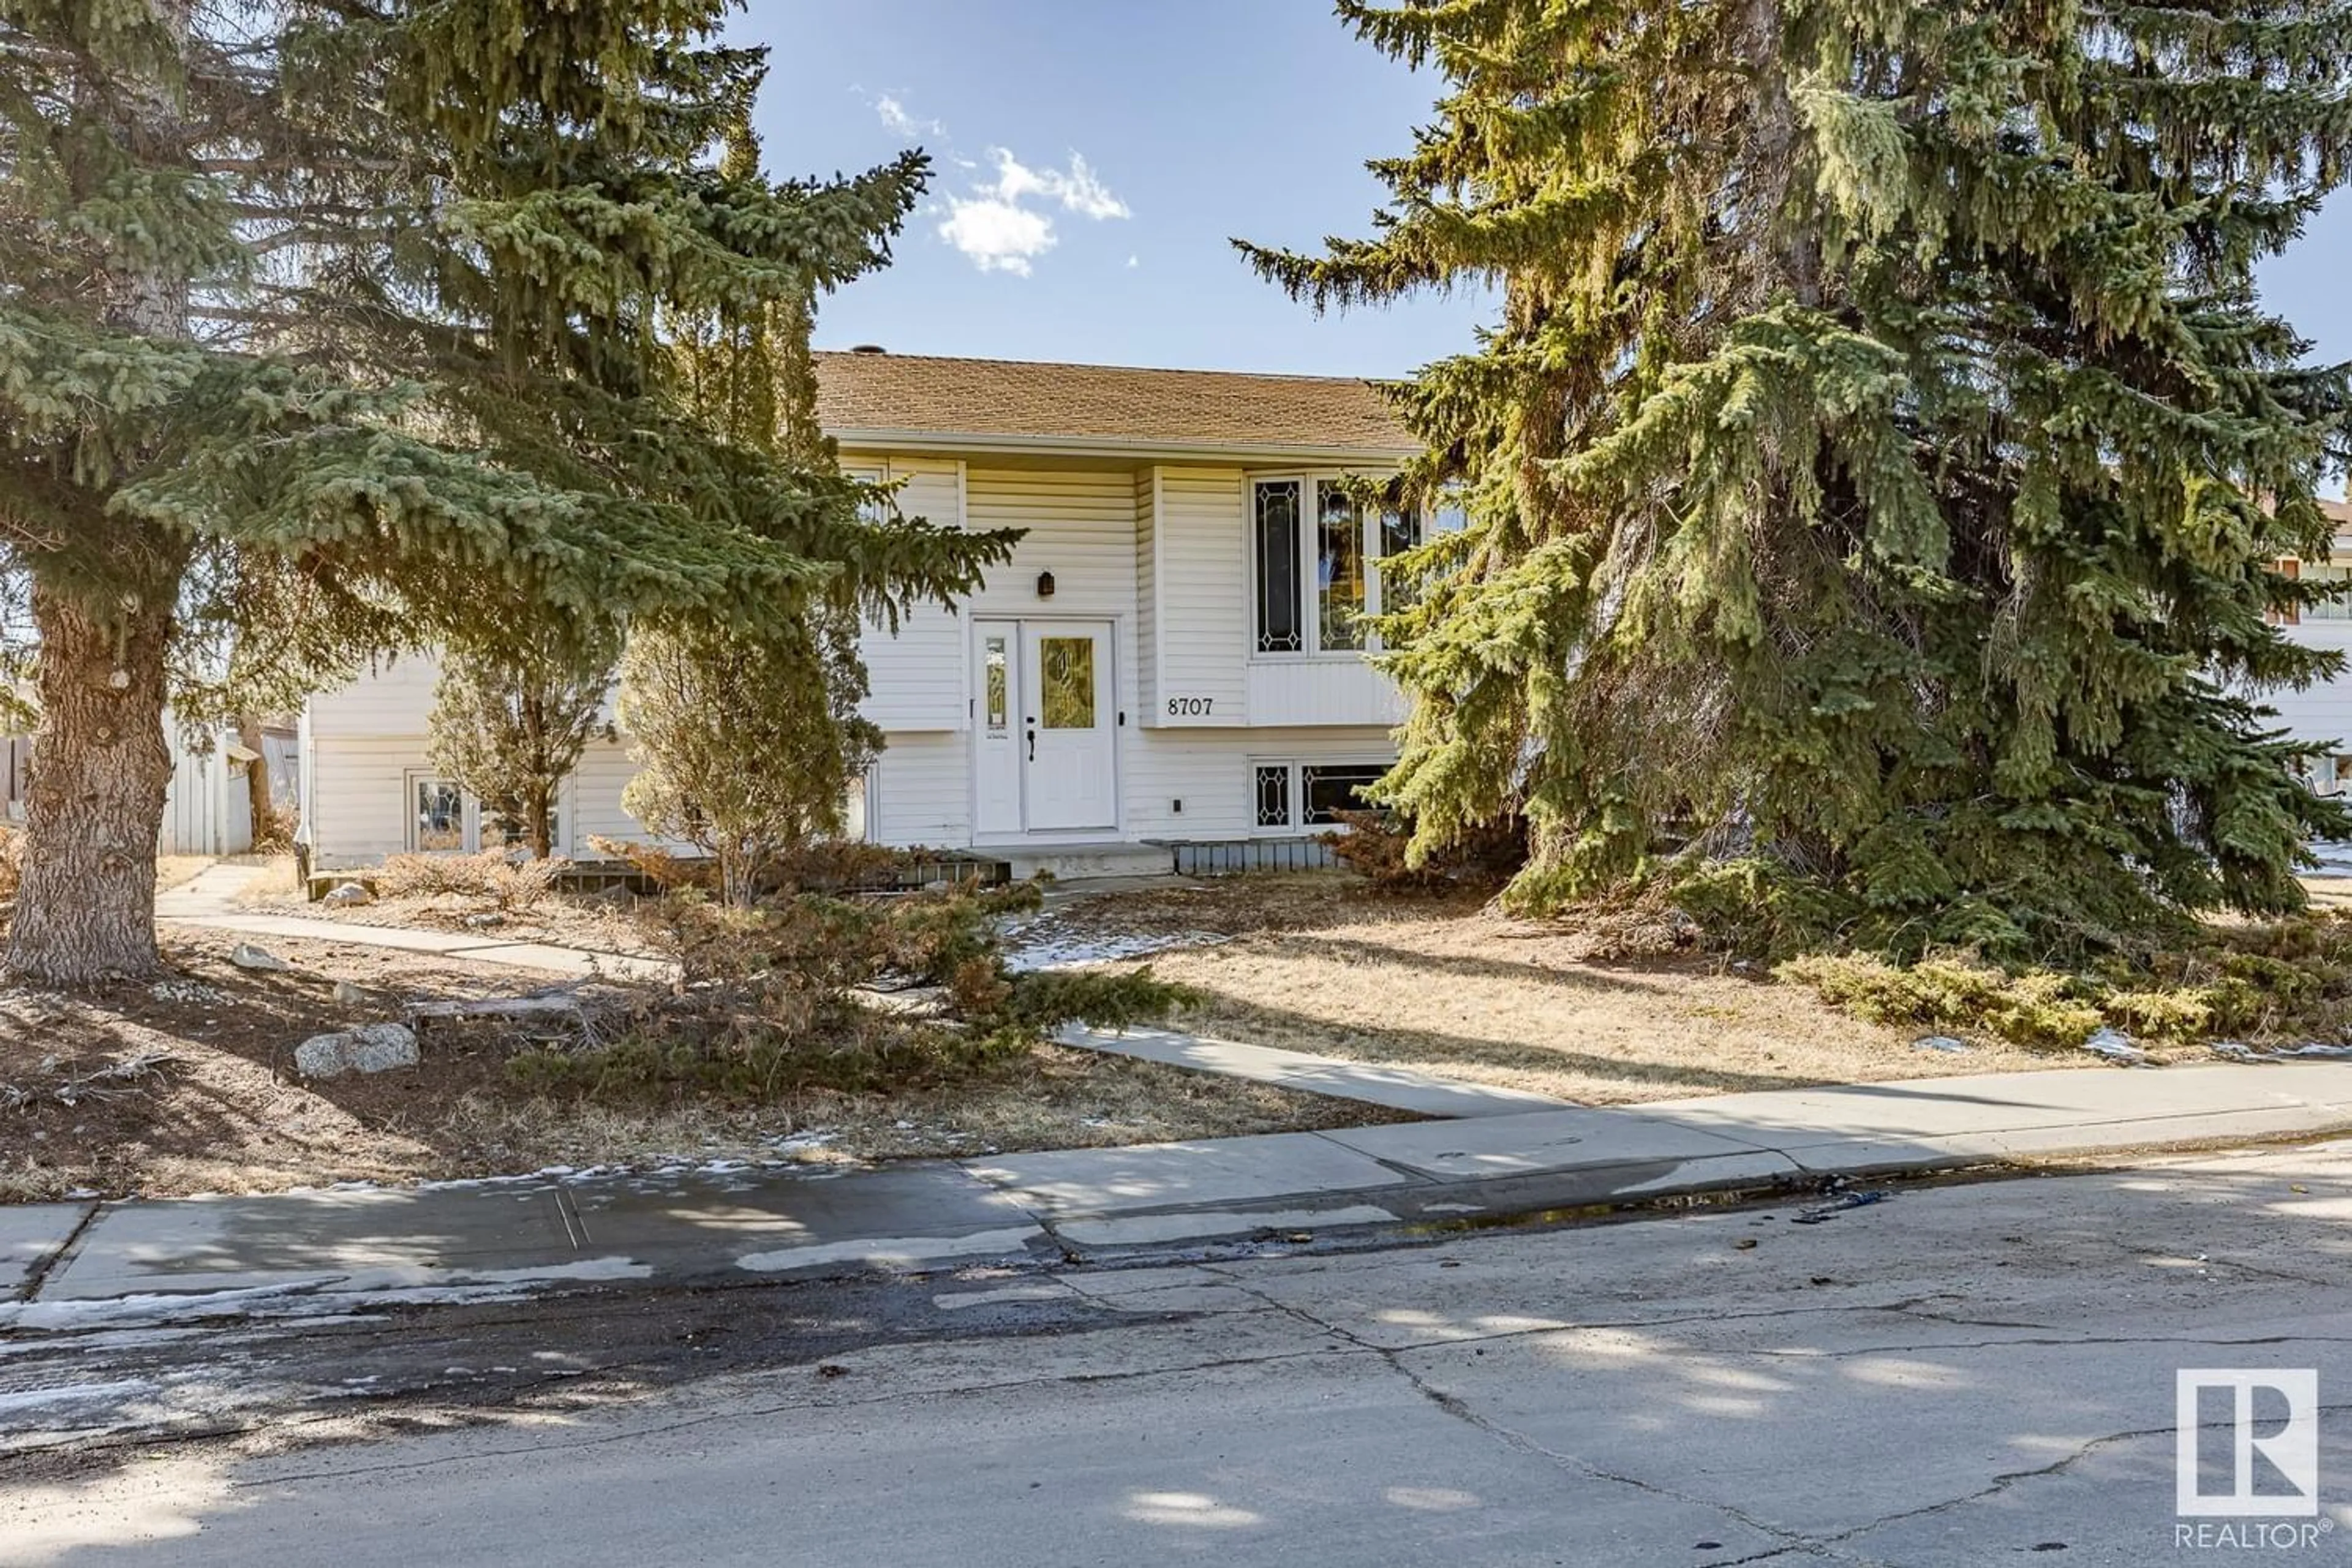 A pic from exterior of the house or condo for 8707 31 AV NW, Edmonton Alberta T6K3A7